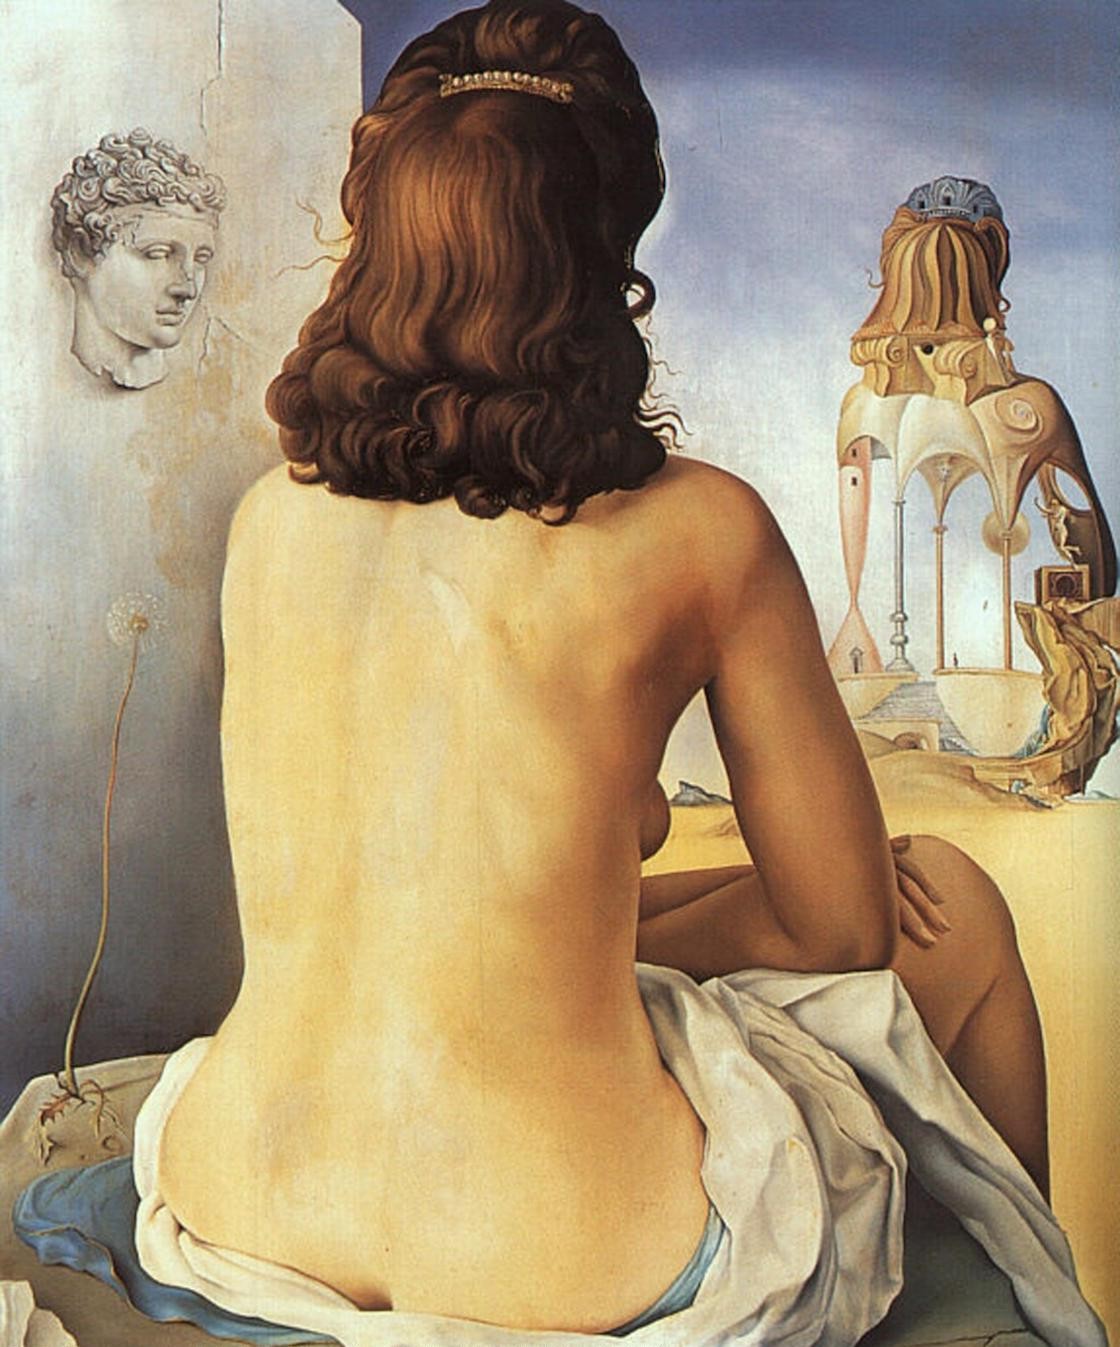 Salvador-dali-dal-my-wife-nude-contemplating-her-own-flesh-becoming-sta_copy.Jpg